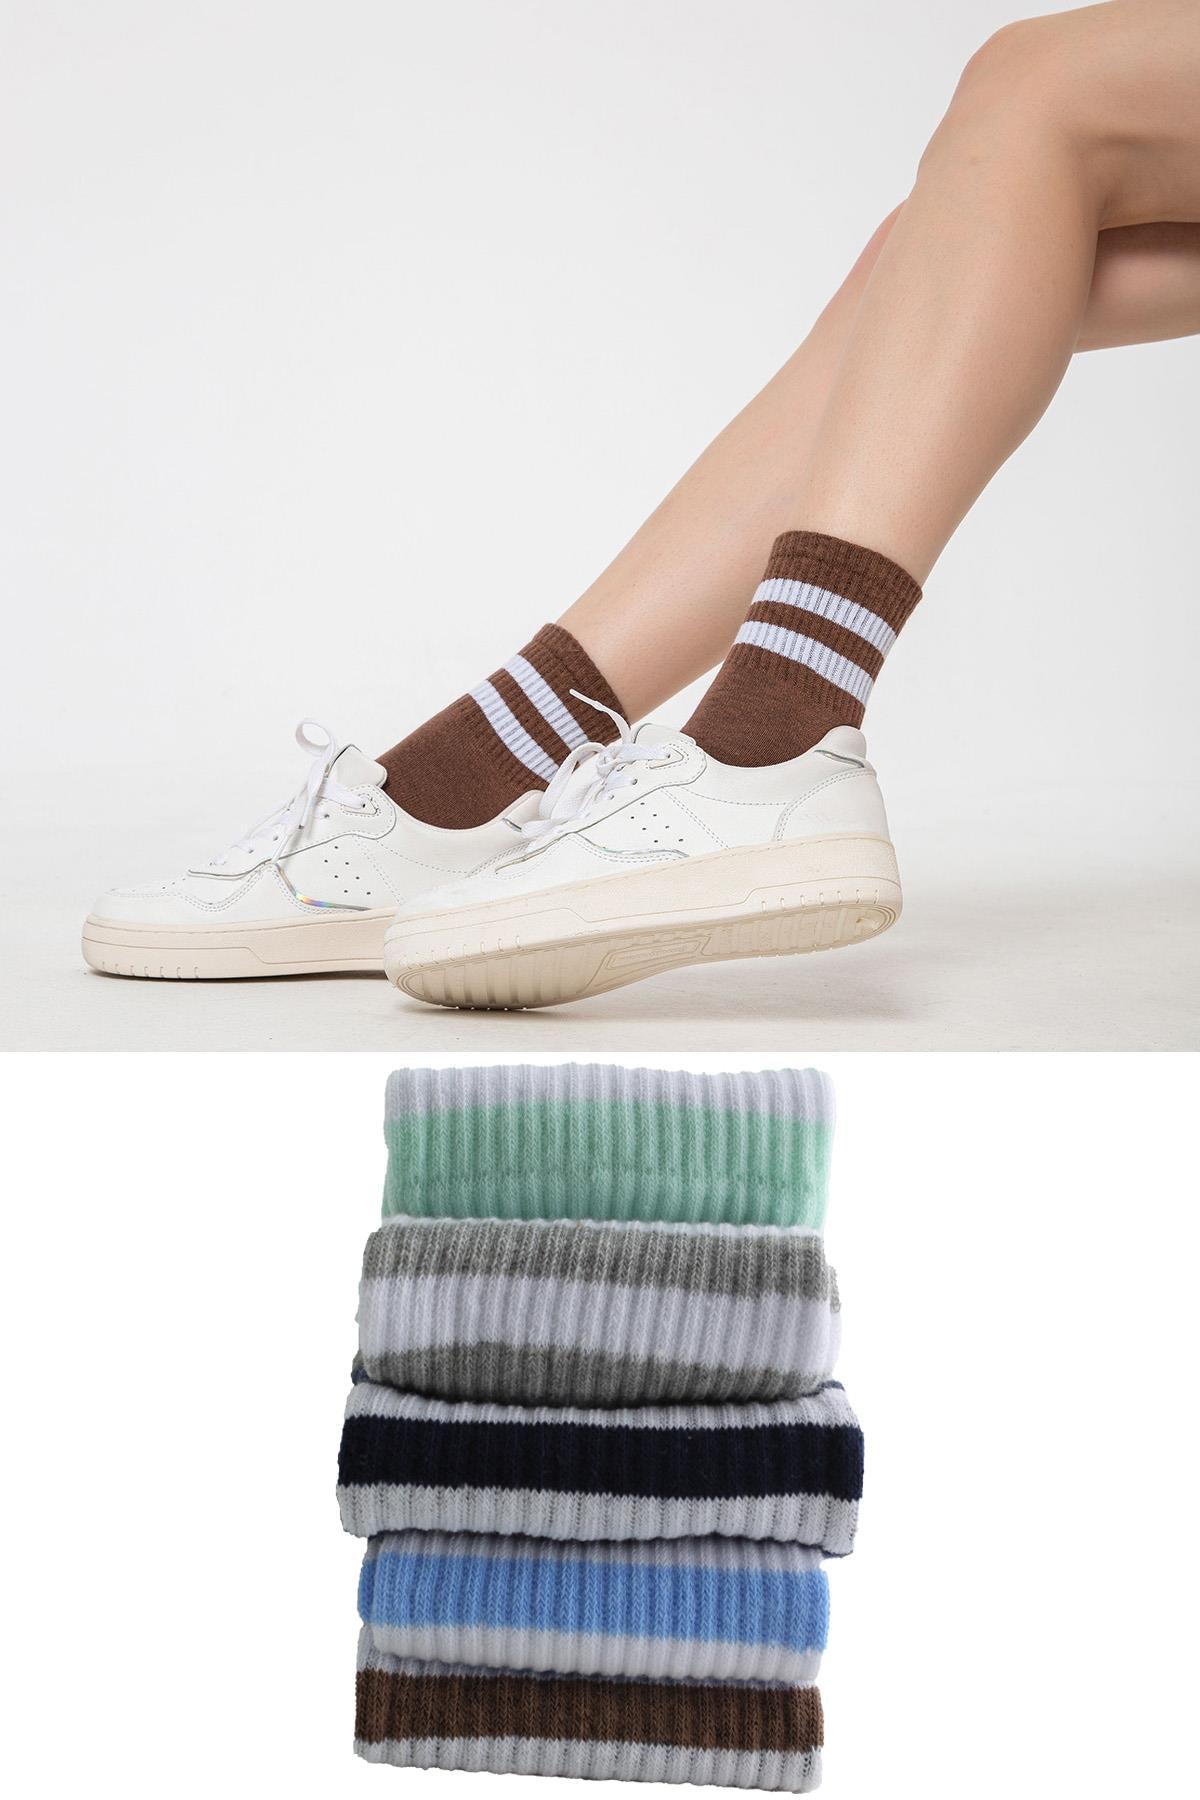 5 Package Package of Cotton White Striped Unisex Women Men's Socks in Different Colors